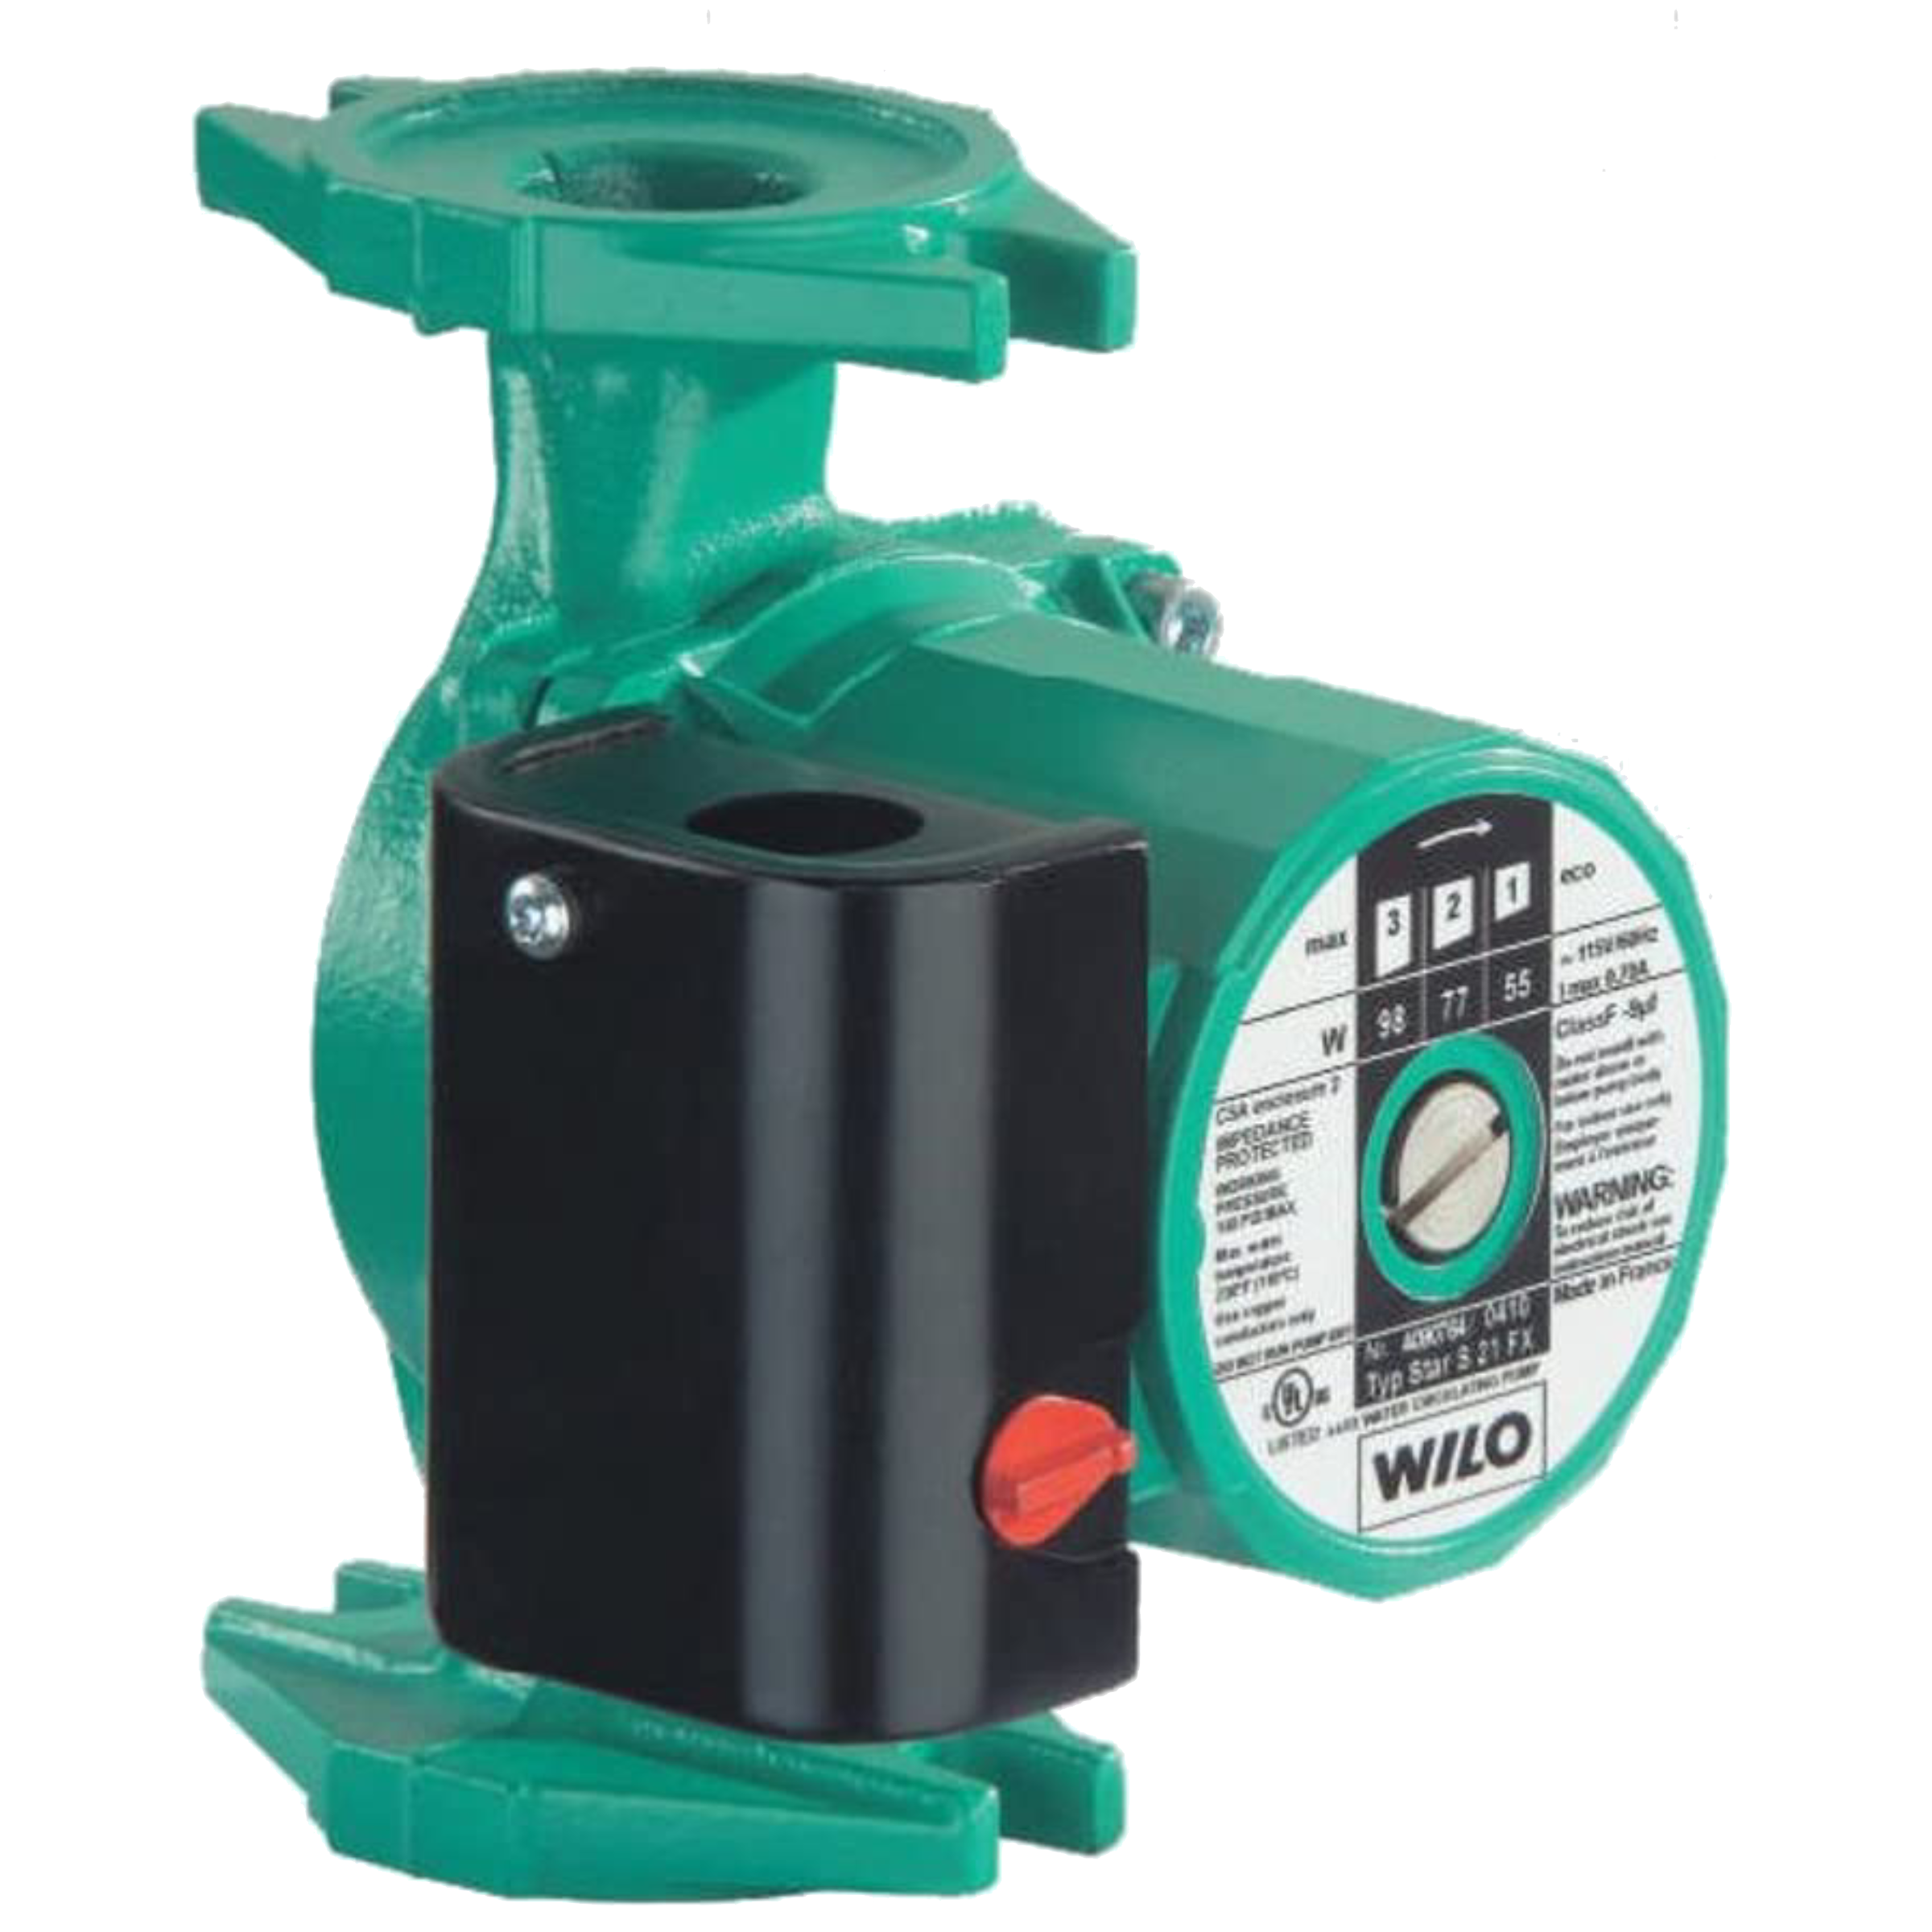 Star S 21 FX Wilo Star S Star S Series Cast Iron 3-Speed Residential Circulating Pump Max Flow 19 USGPM, 140 Psi, 115V/60HZ/1Ph, 1/25 HP